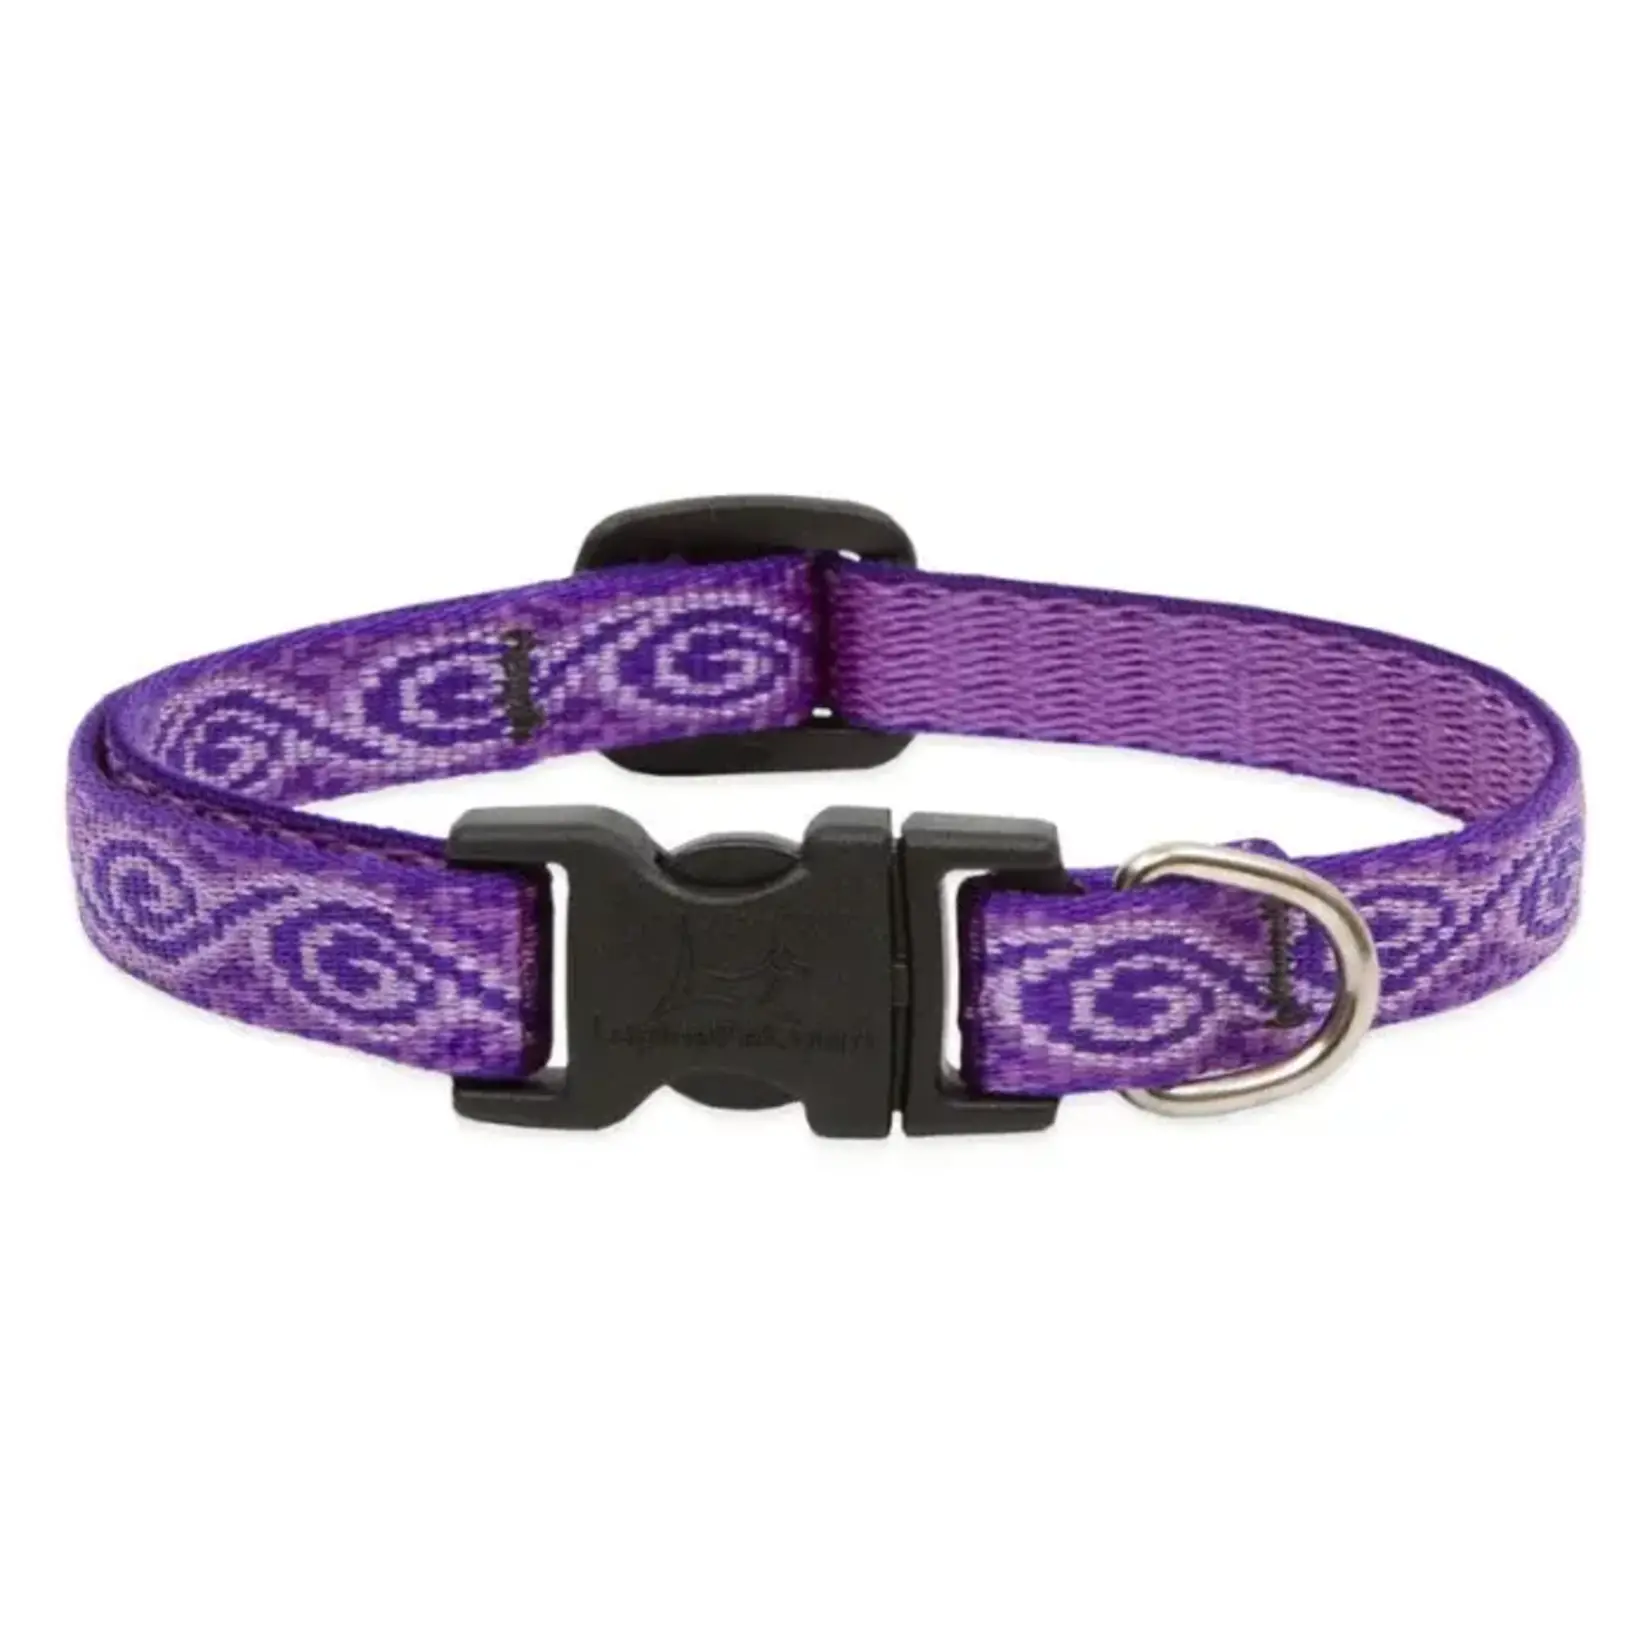 Lupine Lupine Jelly Roll 1/2 in x 10-16 in Adjustable Collar